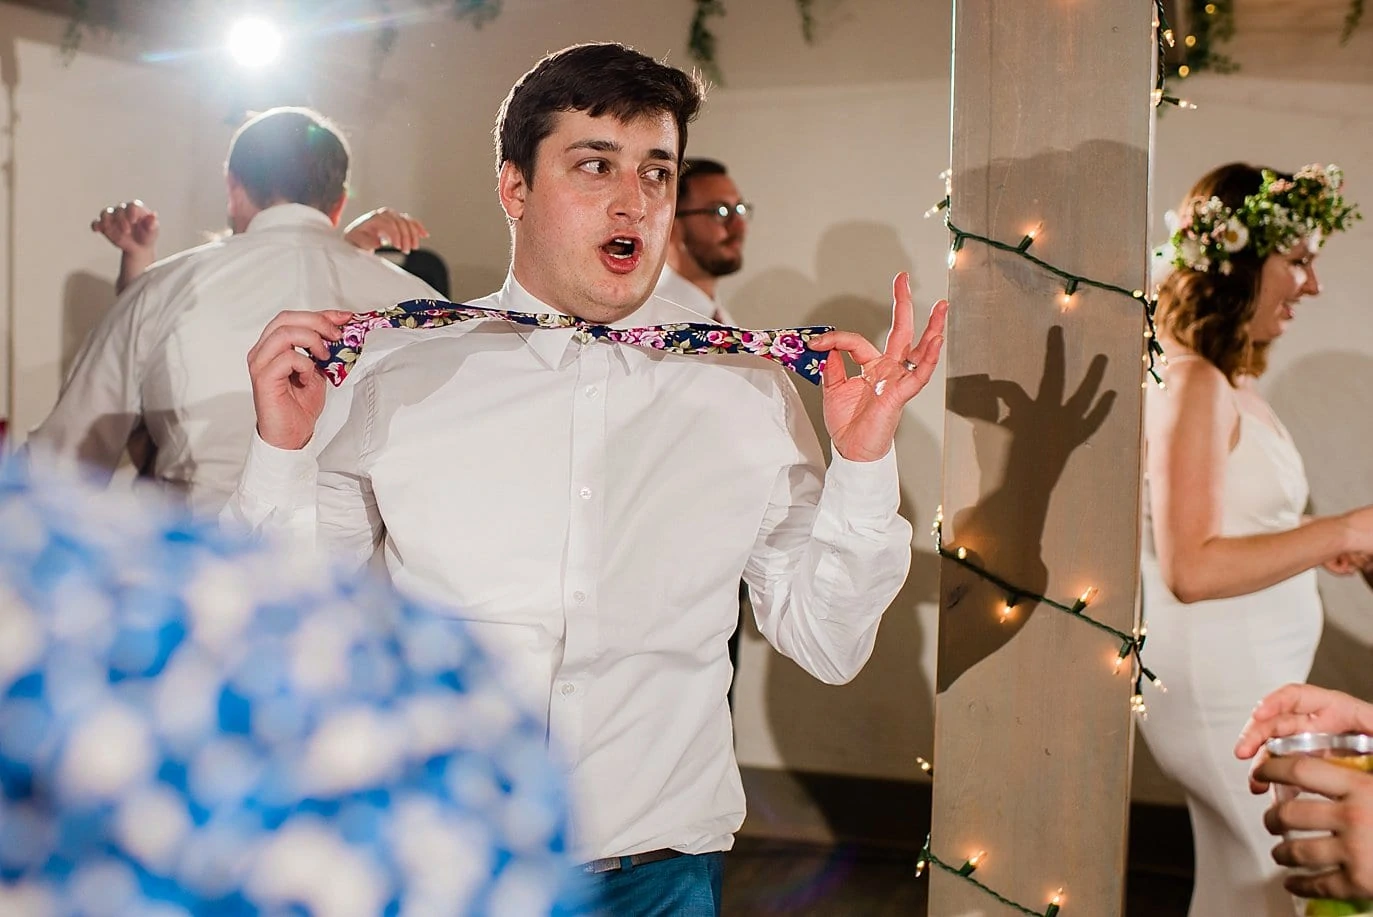 groom dancing with bow tie at wedding reception photo